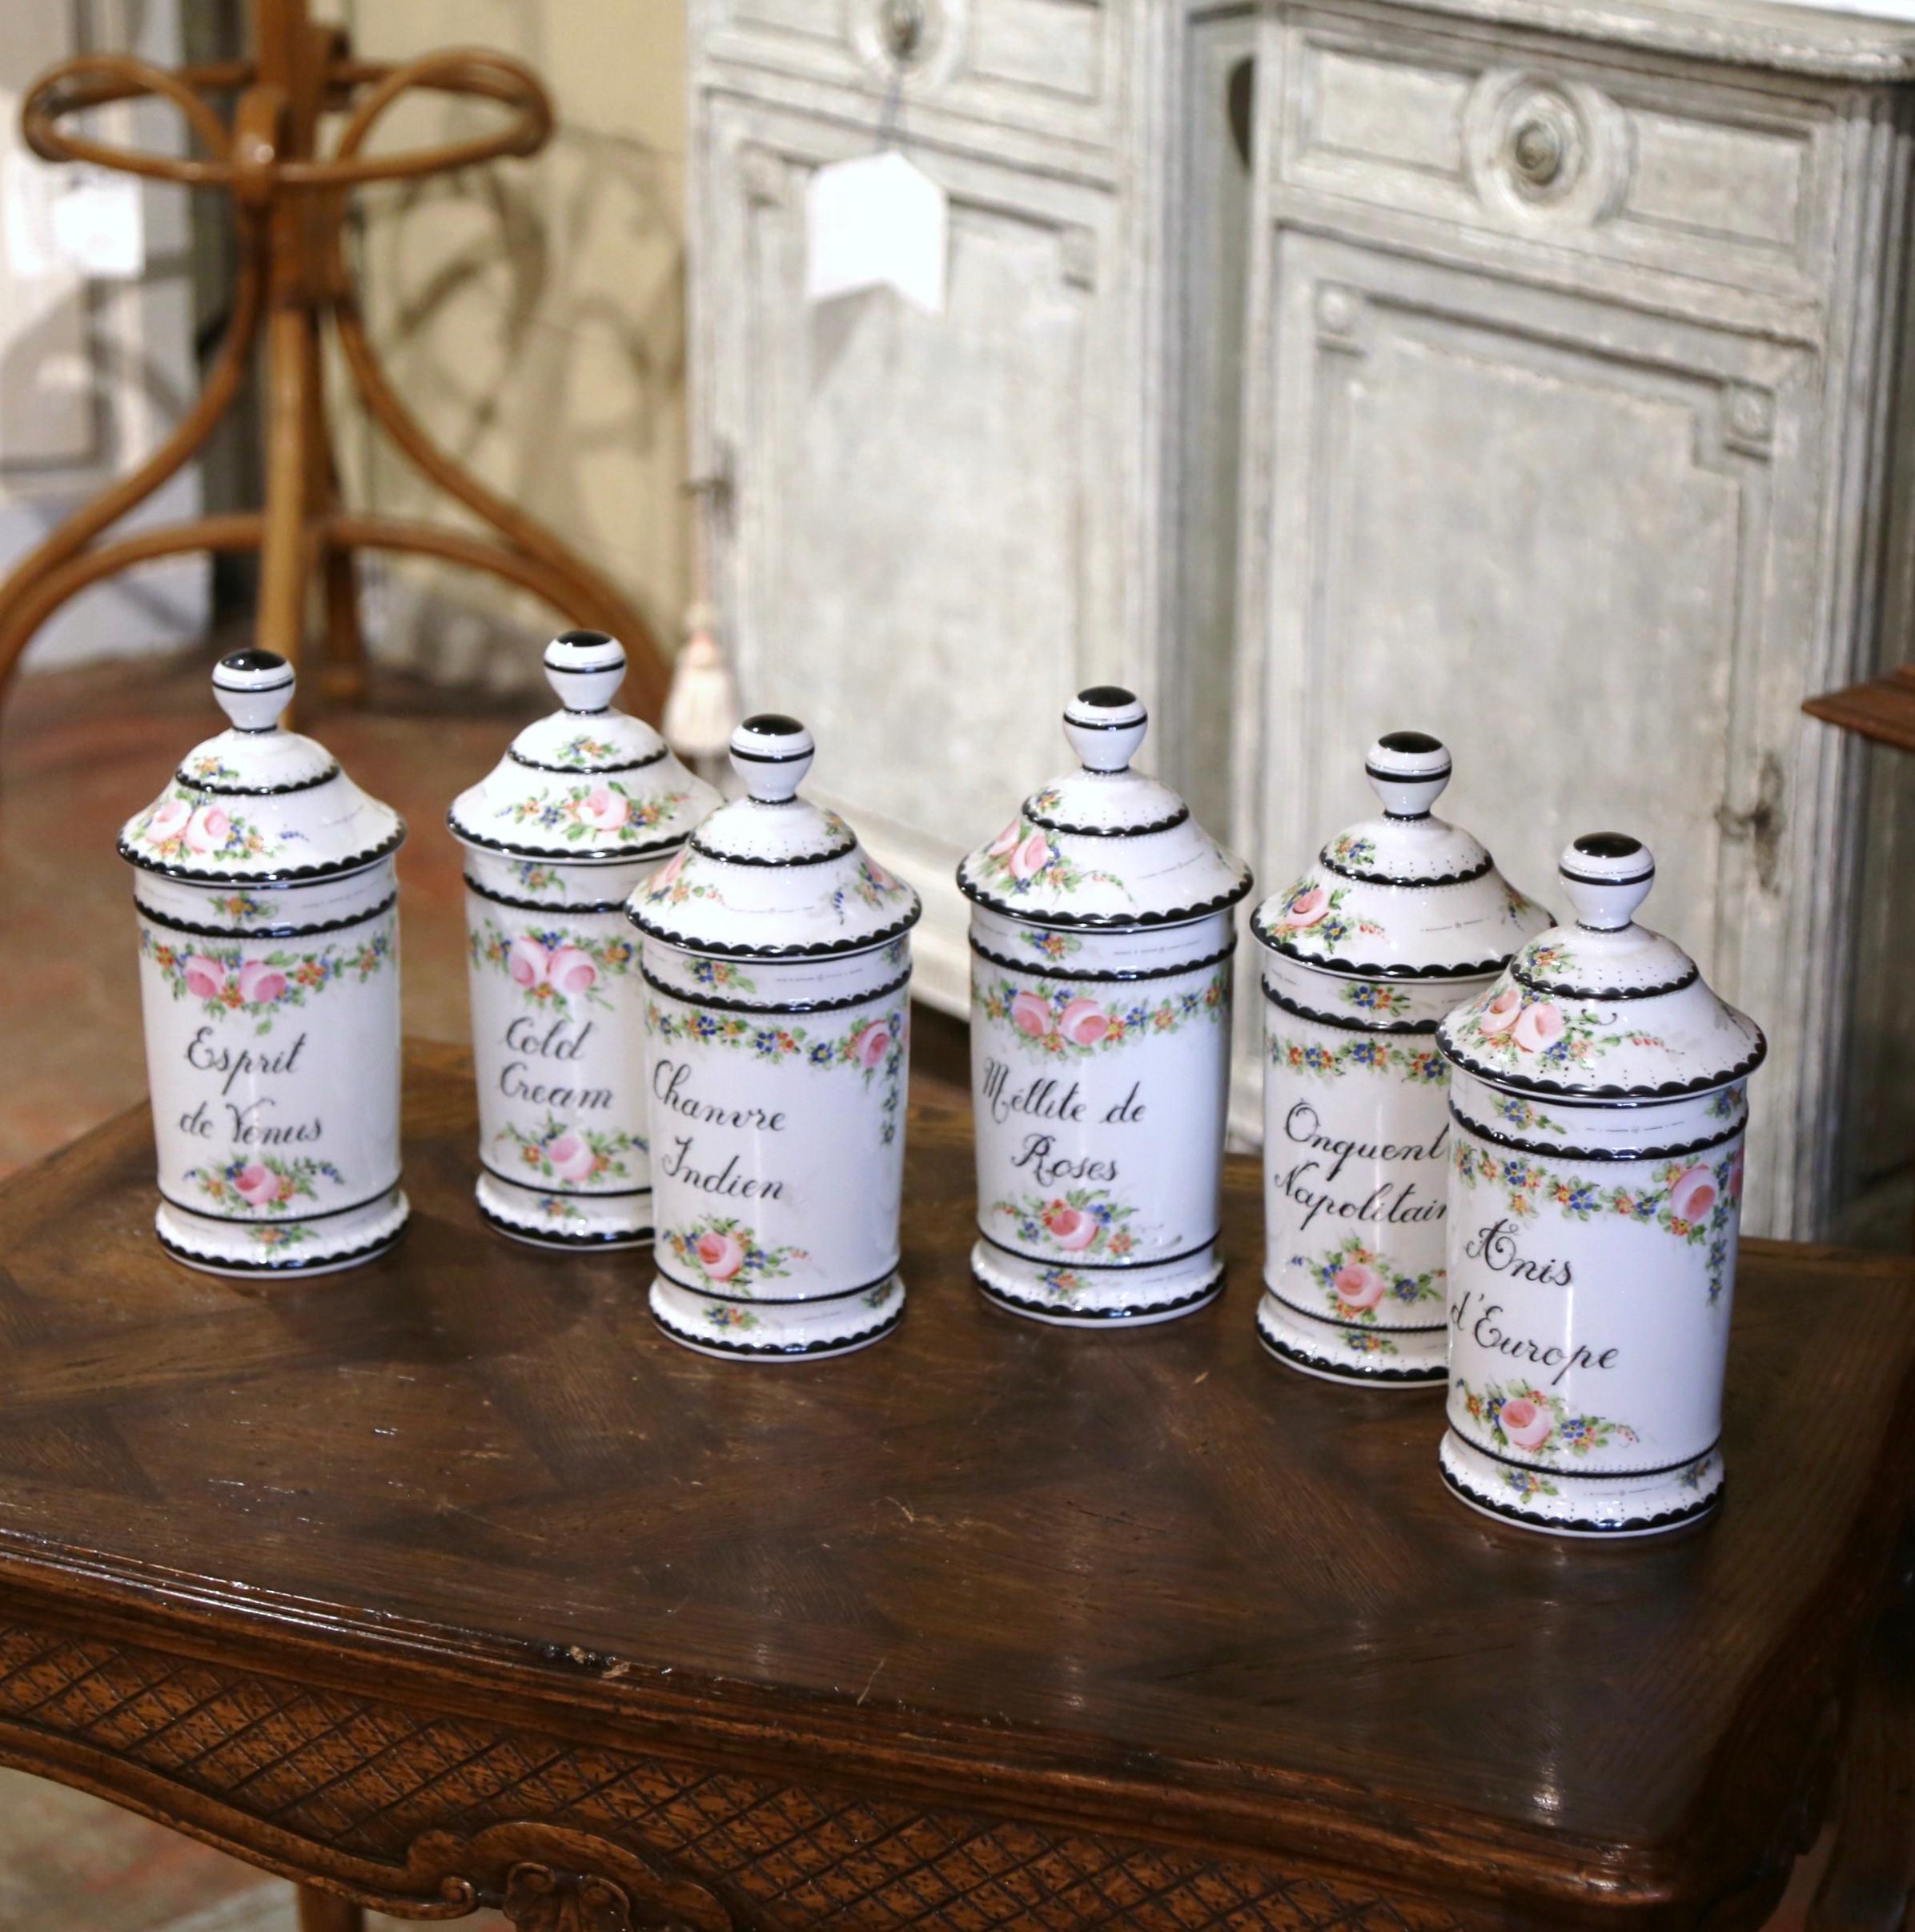 Hand-Painted Midcentury French Limoges Porcelain Apothecary or Pharmacy Jars, Set of 6